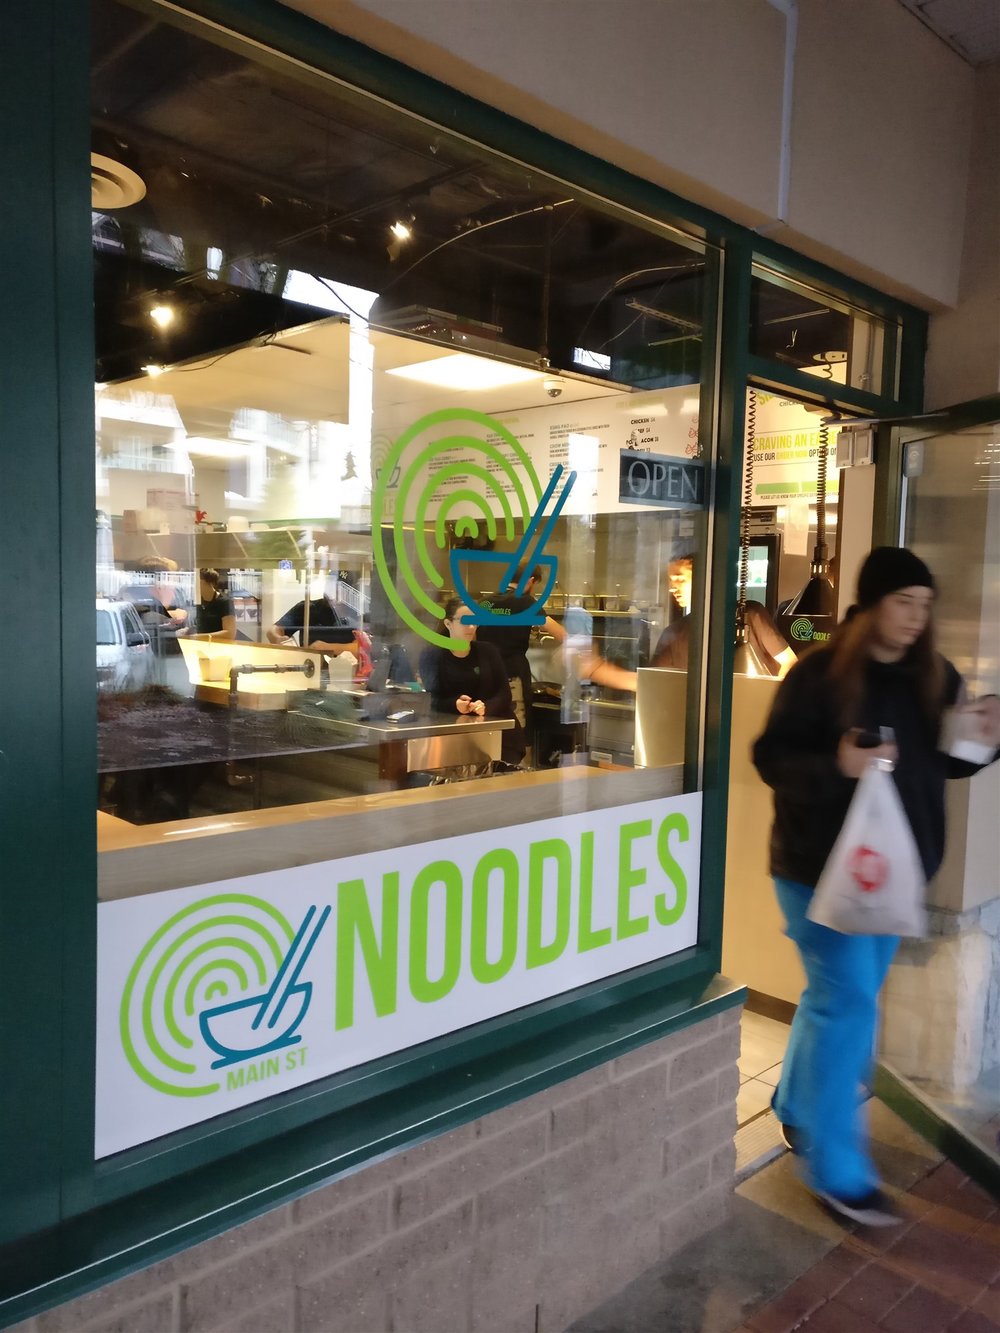 Main Street Noodles is located in Whistler’s “Fast Food Alley.” © Ski Travel Go